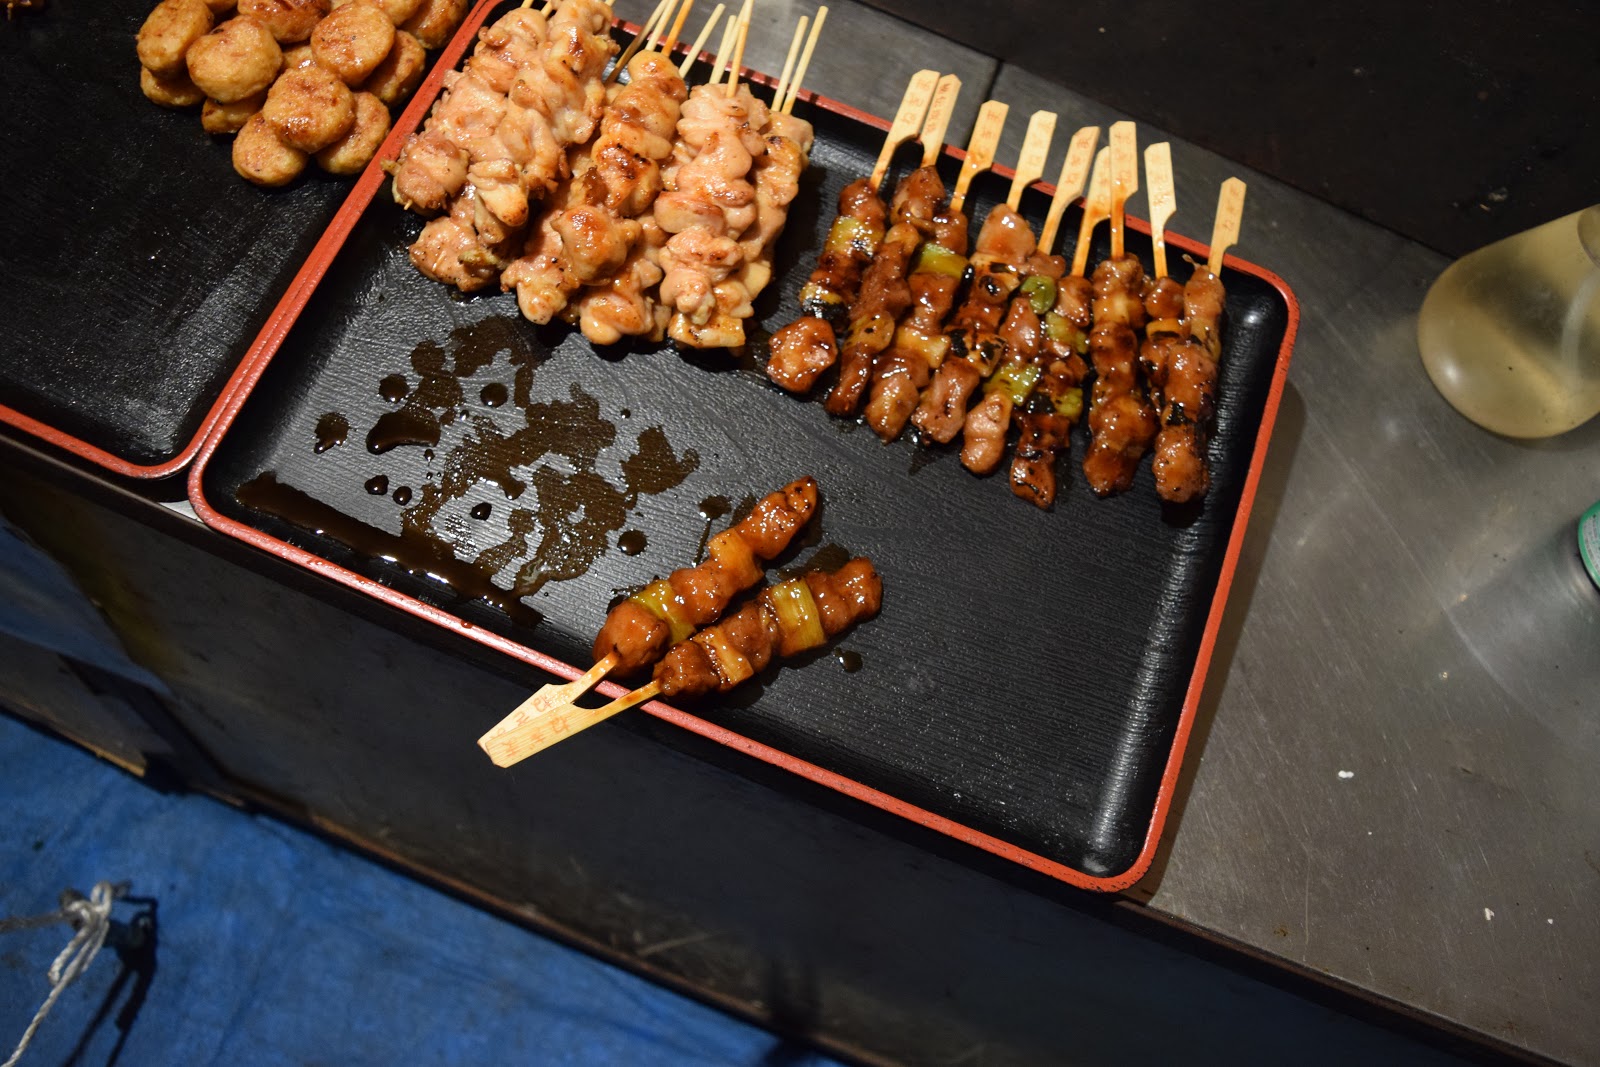 Yakitori at a yatai food stand on New Years eve in Japan